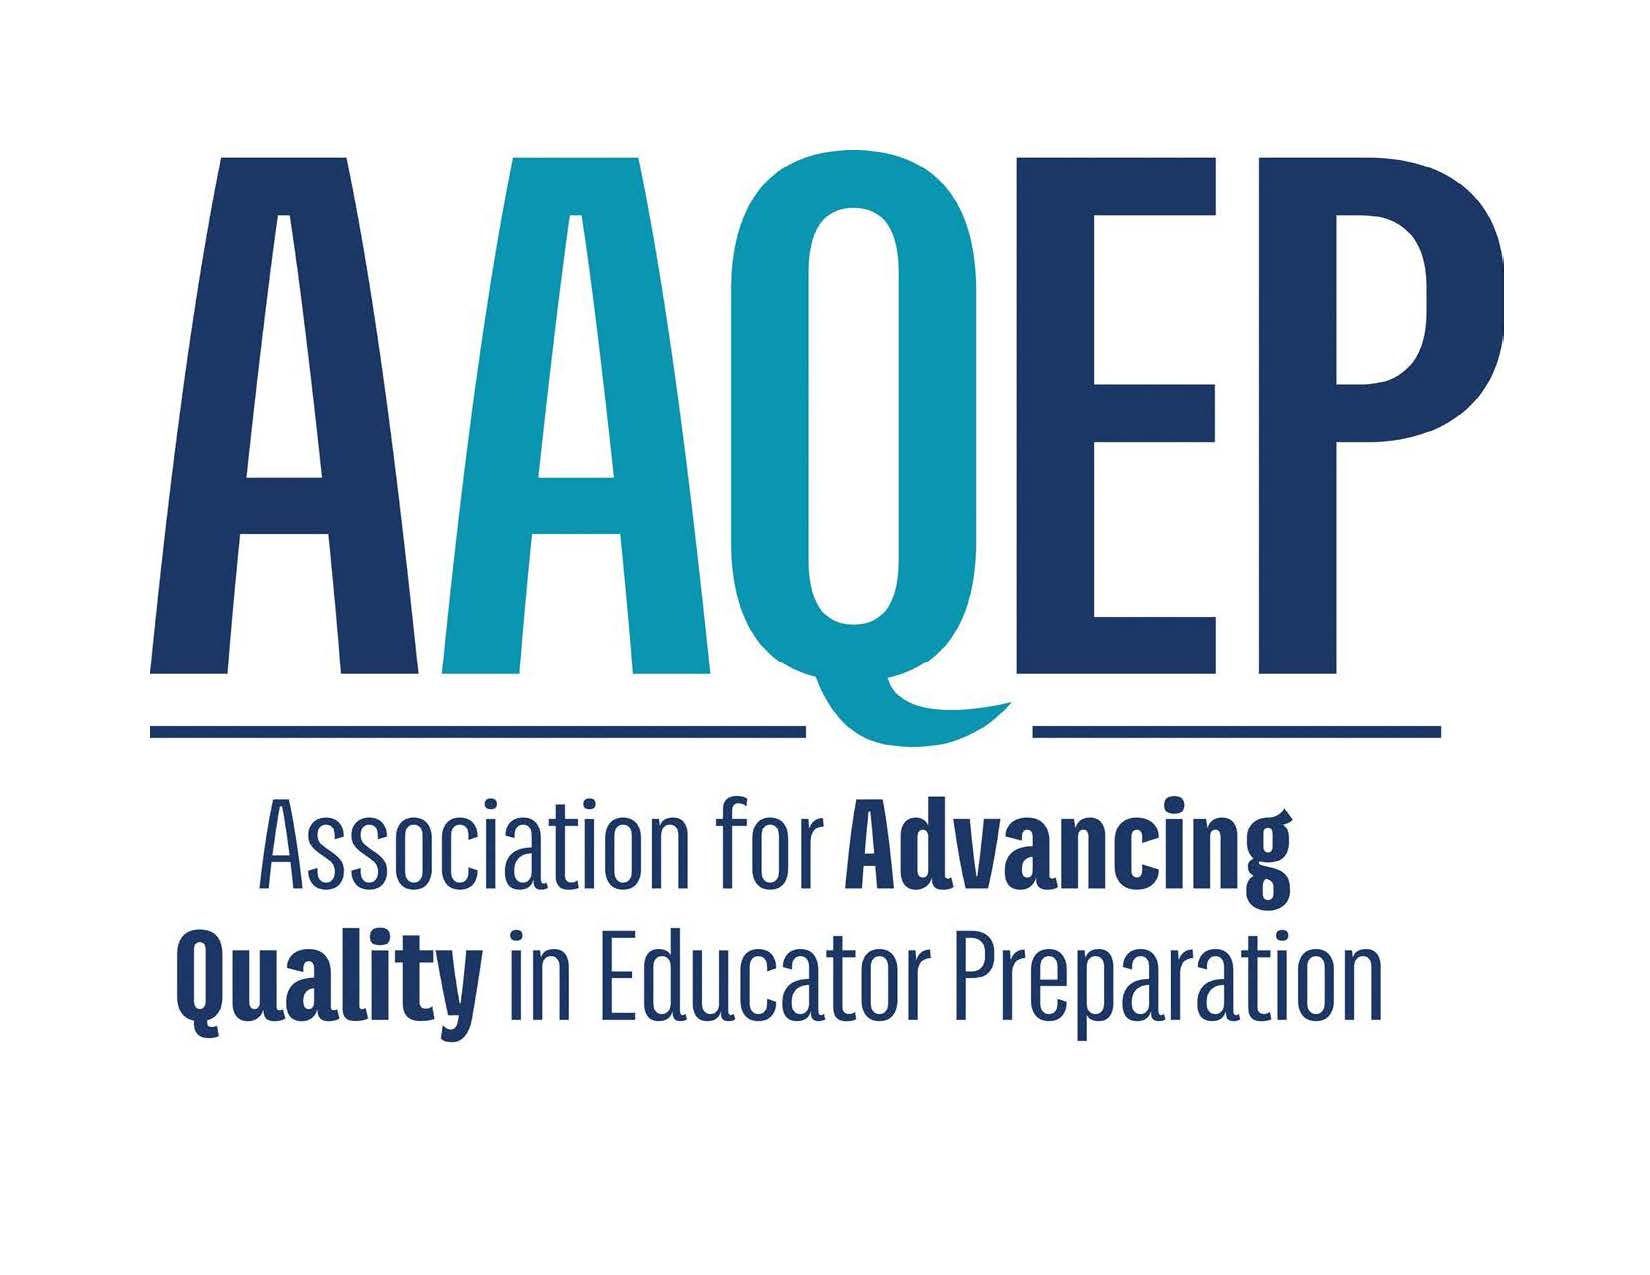 Association for Advancing Quality in Educator Preparation (AAQEP) Logo